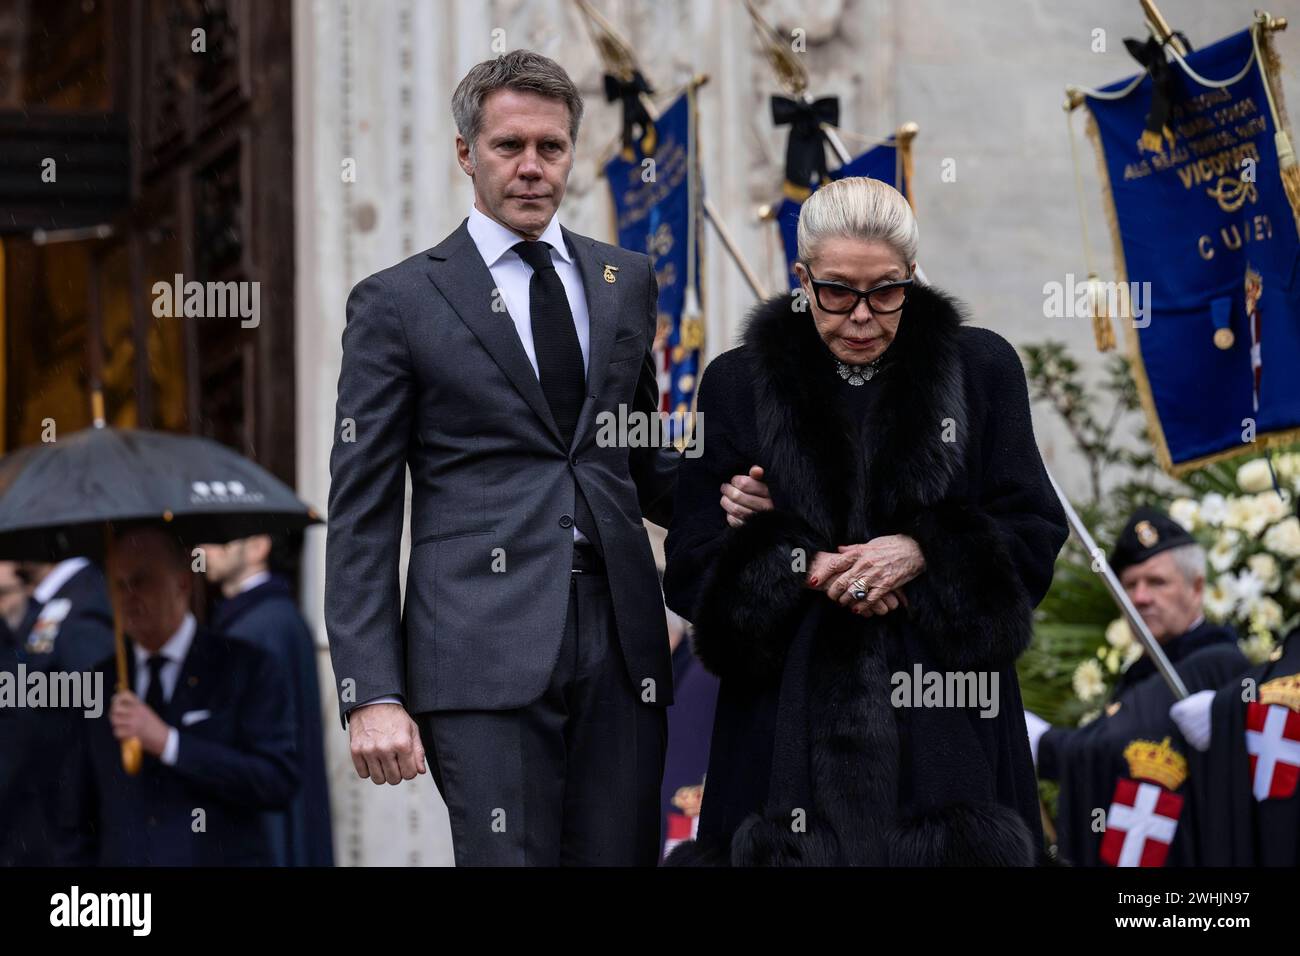 Vittorio Emanuele funeral Marina Doria of Savoy R, widow of Vittorio Emanuele of Savoy, and Emanuele Filiberto of Savoy, son of Vittorio Emanuele of Savoy, exit the Turin Cathedral following the funeral ceremony of Vittorio Emanuele of Savoy. Vittorio Emanuele of Savoy was the son of Umberto II of Savoy, the last king of Italy, and he died in Geneva on February 3, 2024. Turin Italy Copyright: xNicolòxCampox Stock Photo